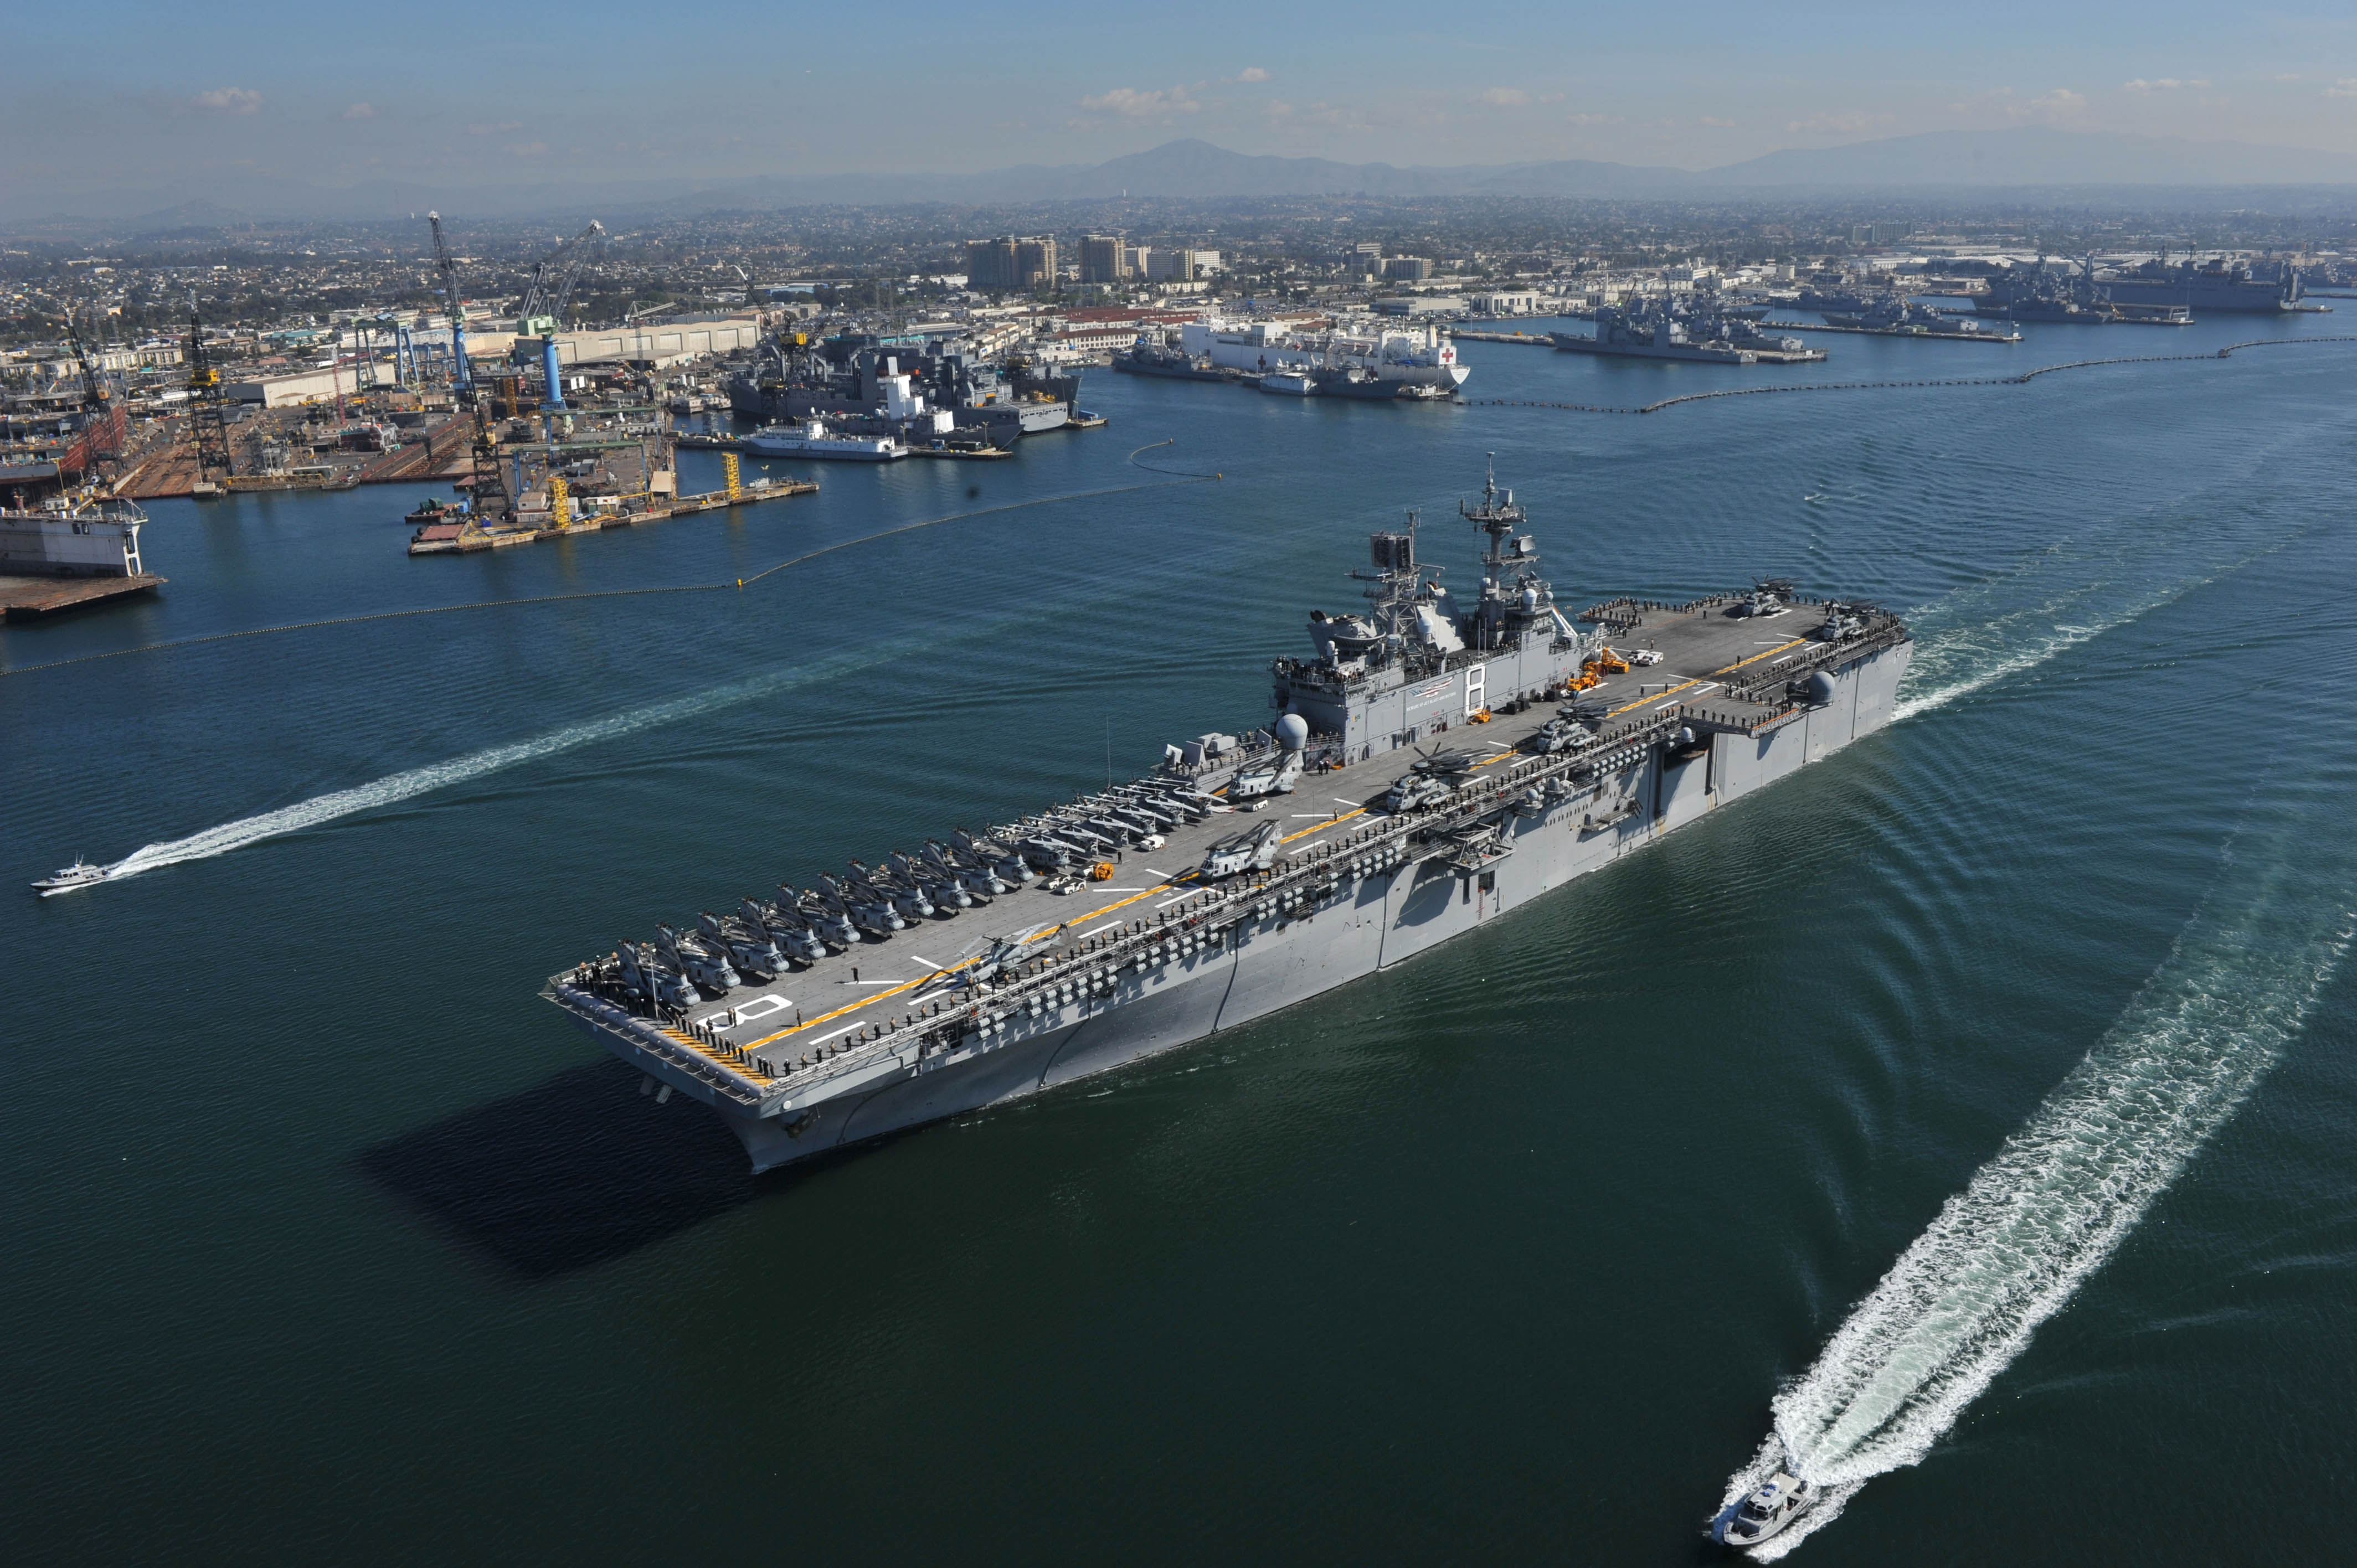 US_Navy_111114-N-KD852-030_The_amphibious_assault_ship_USS_Makin_Island_(LHD_8)_departs_Naval_Base_San_Diego_on_its_first_operational_deployment_to.jpg